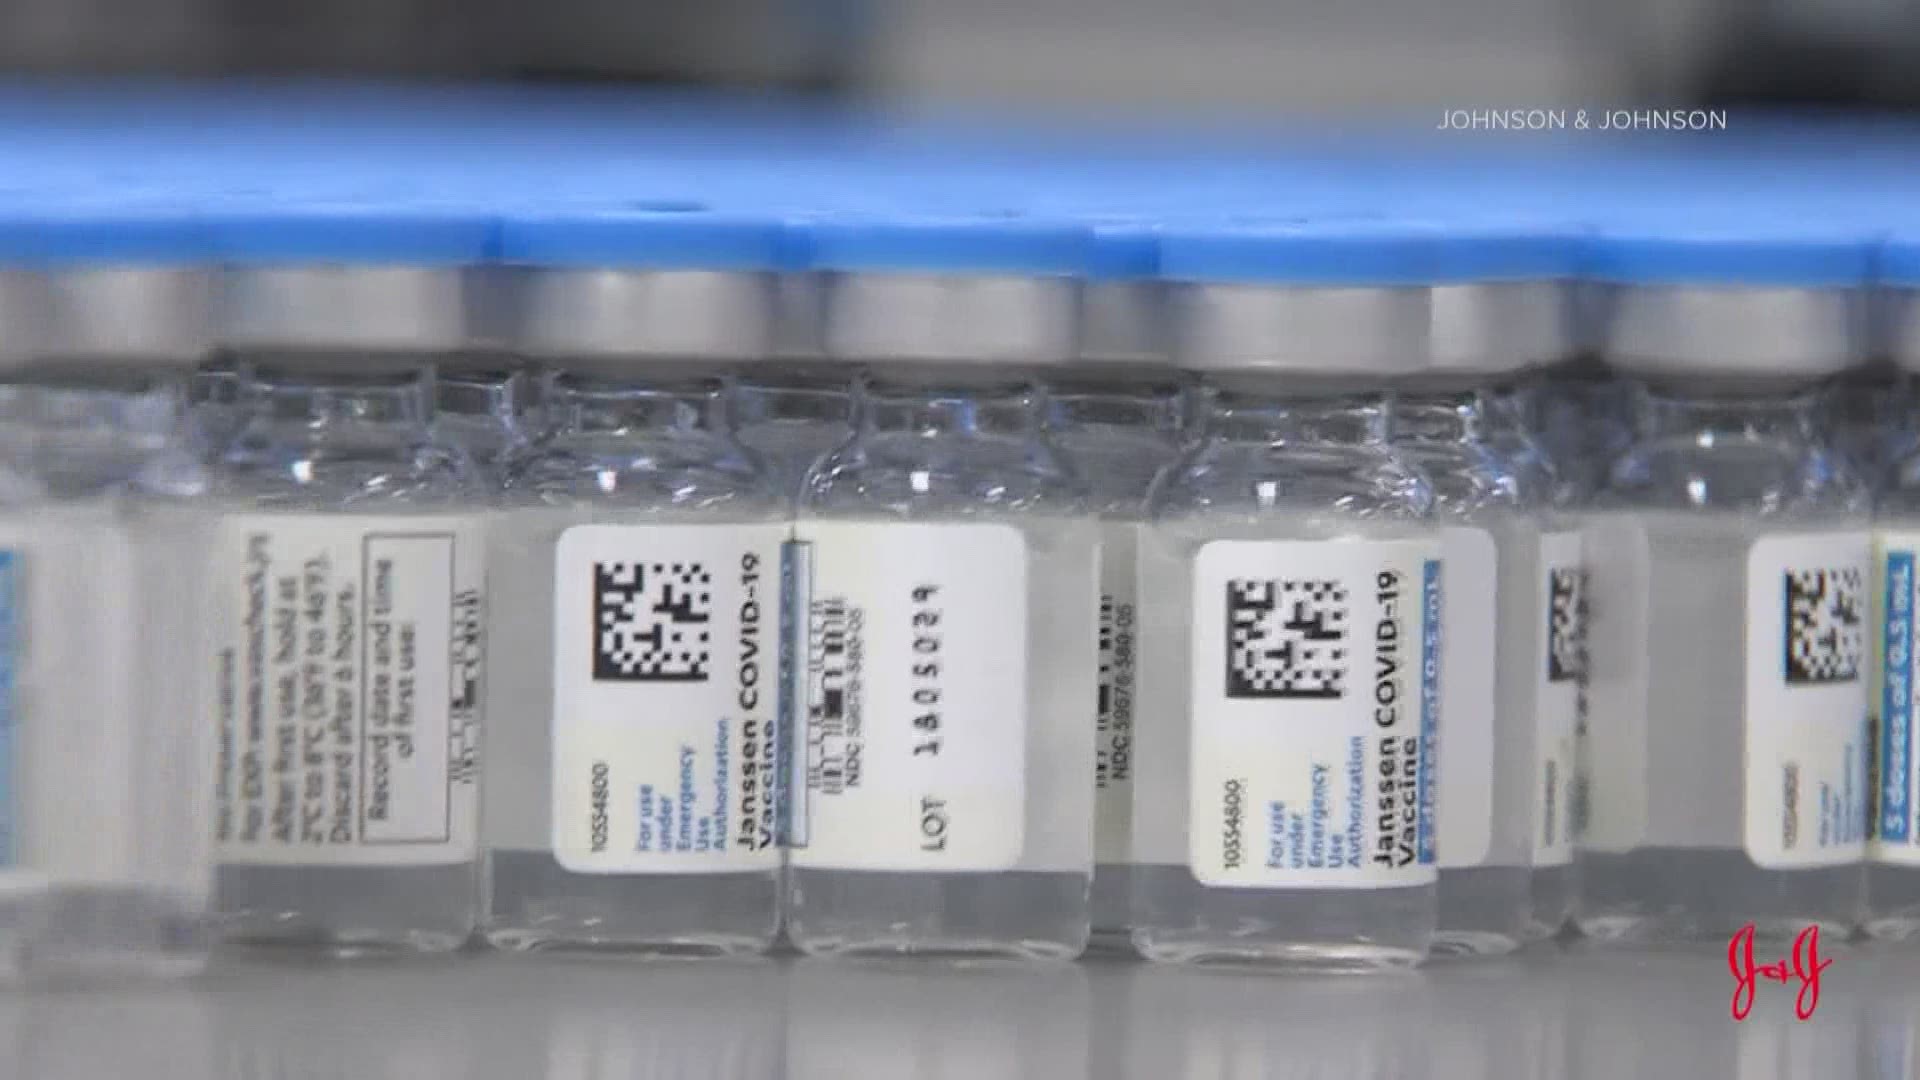 On Thursday, Washington state introduced a vaccine lottery with a $1 million dollar jackpot intended to boost vaccination rates in the state.